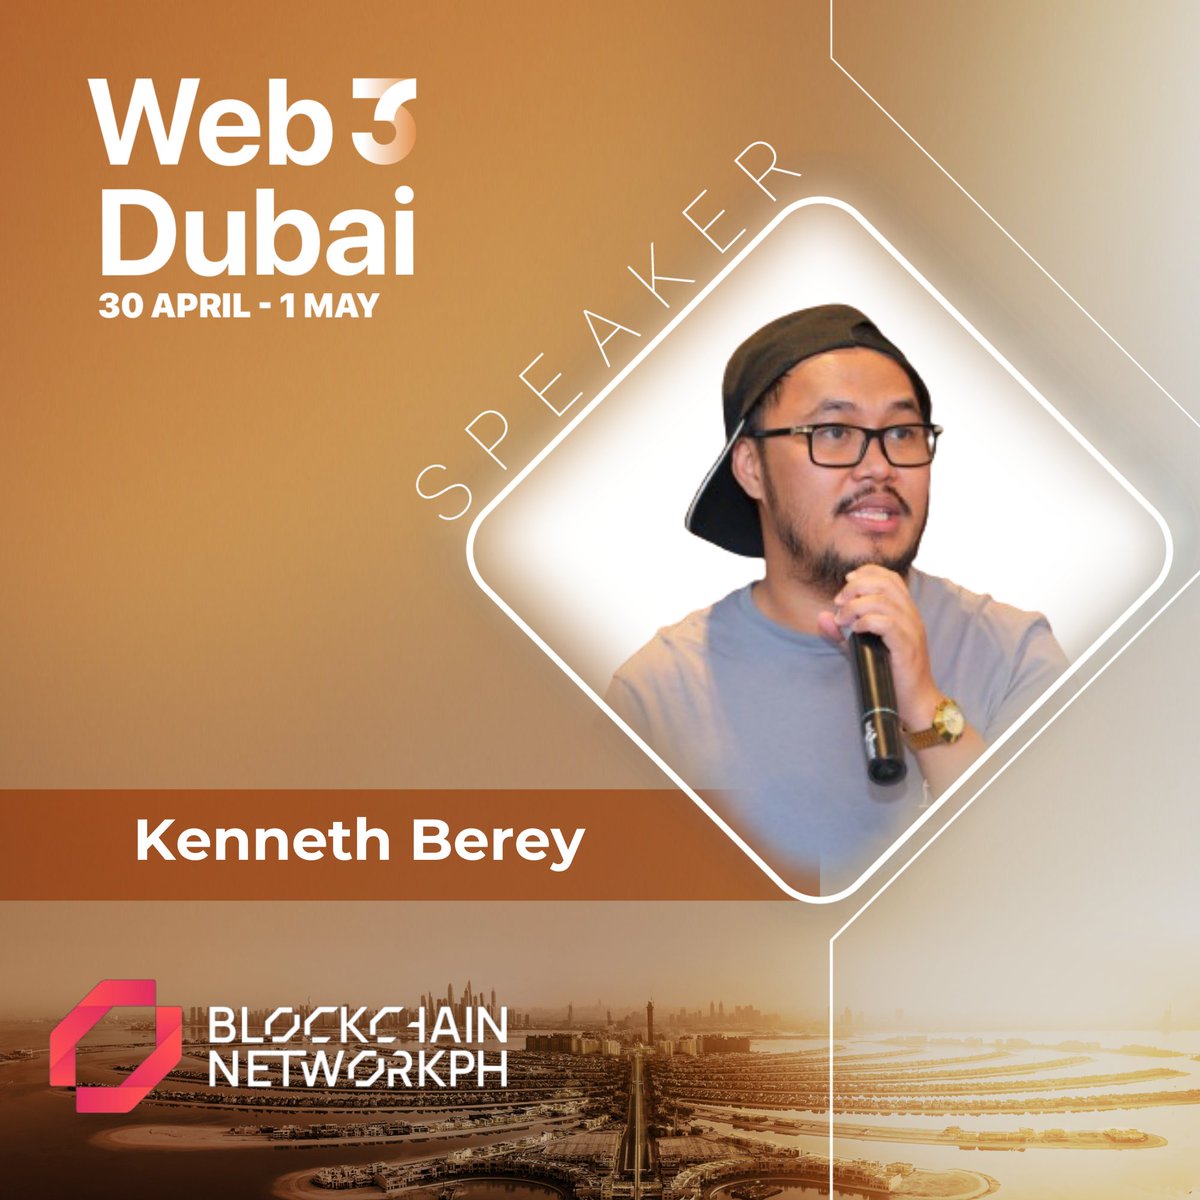 🎊 Excited to announce that Kenneth Berey from @blockchainnph will be joining us at Web3 Dubai as a speaker. 🎟 Grab your free ticket with CODE: web3dubaievent discover.billyapp.live/events/web3-du…